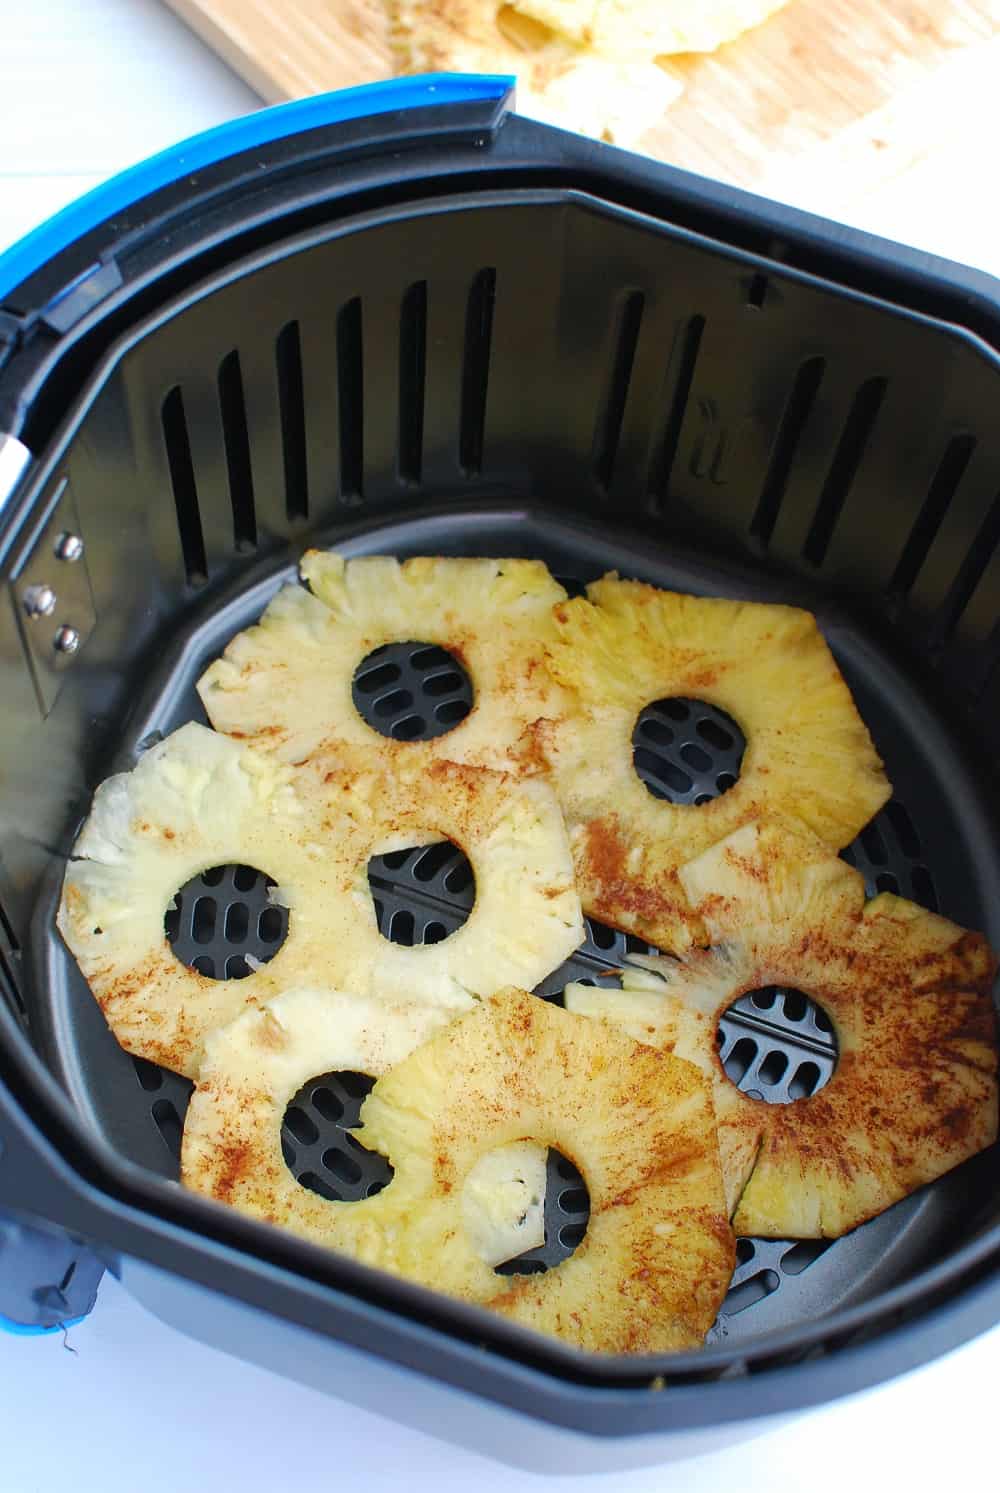 https://www.snackinginsneakers.com/wp-content/uploads/2020/04/Air-Fryer-Dehydrated-Pineapple-4.jpg